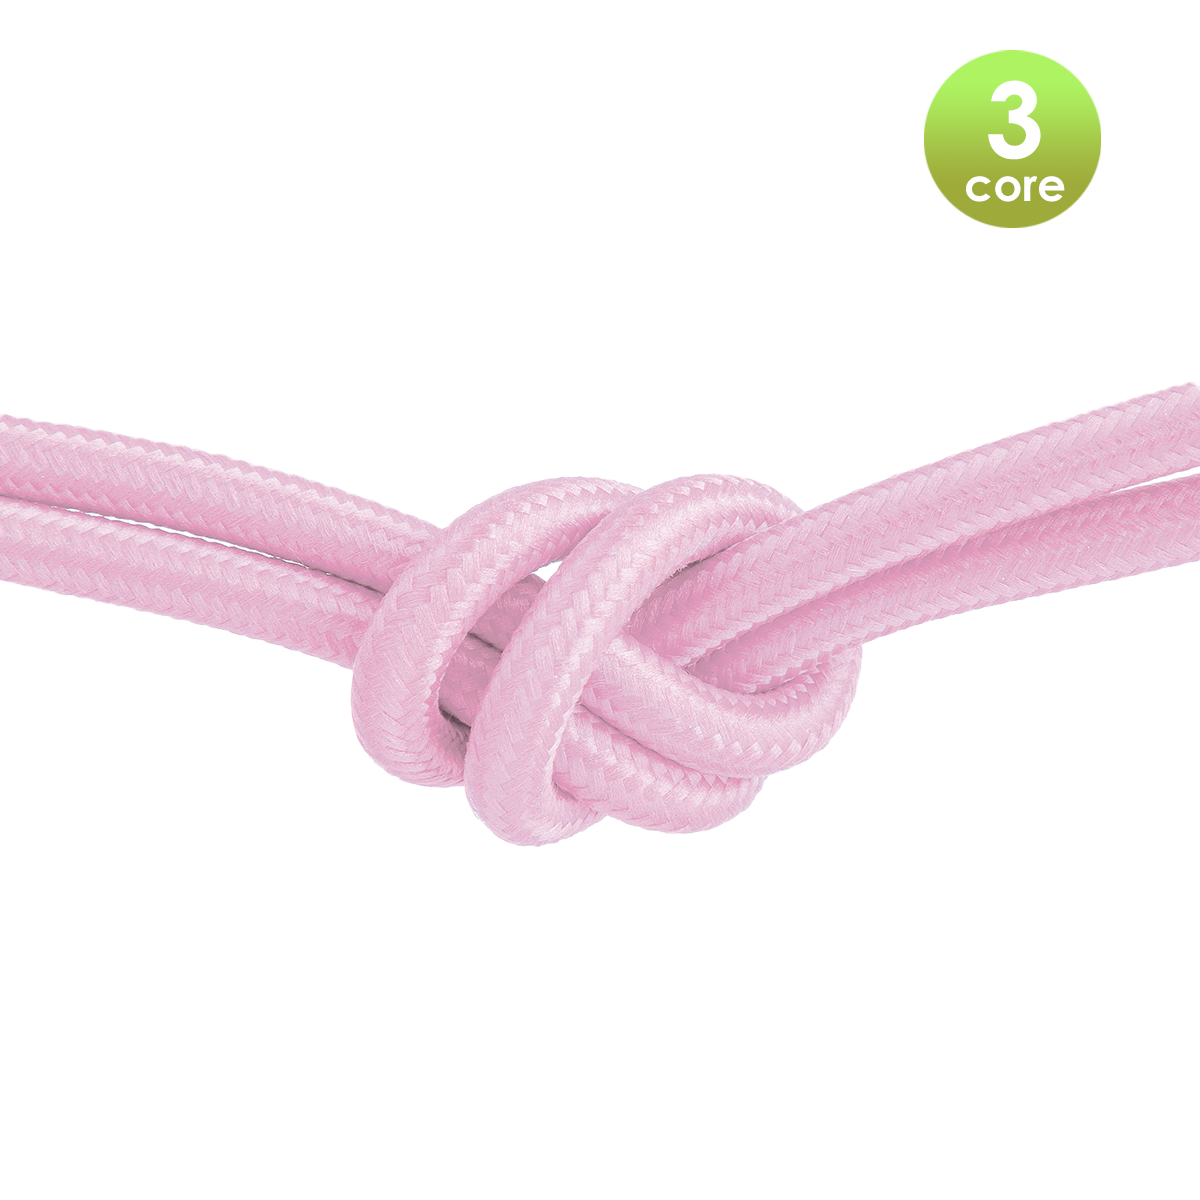 Tangla lighting - TLCB01002RD - 3c - Fabric cable 3 core - in pink pearl